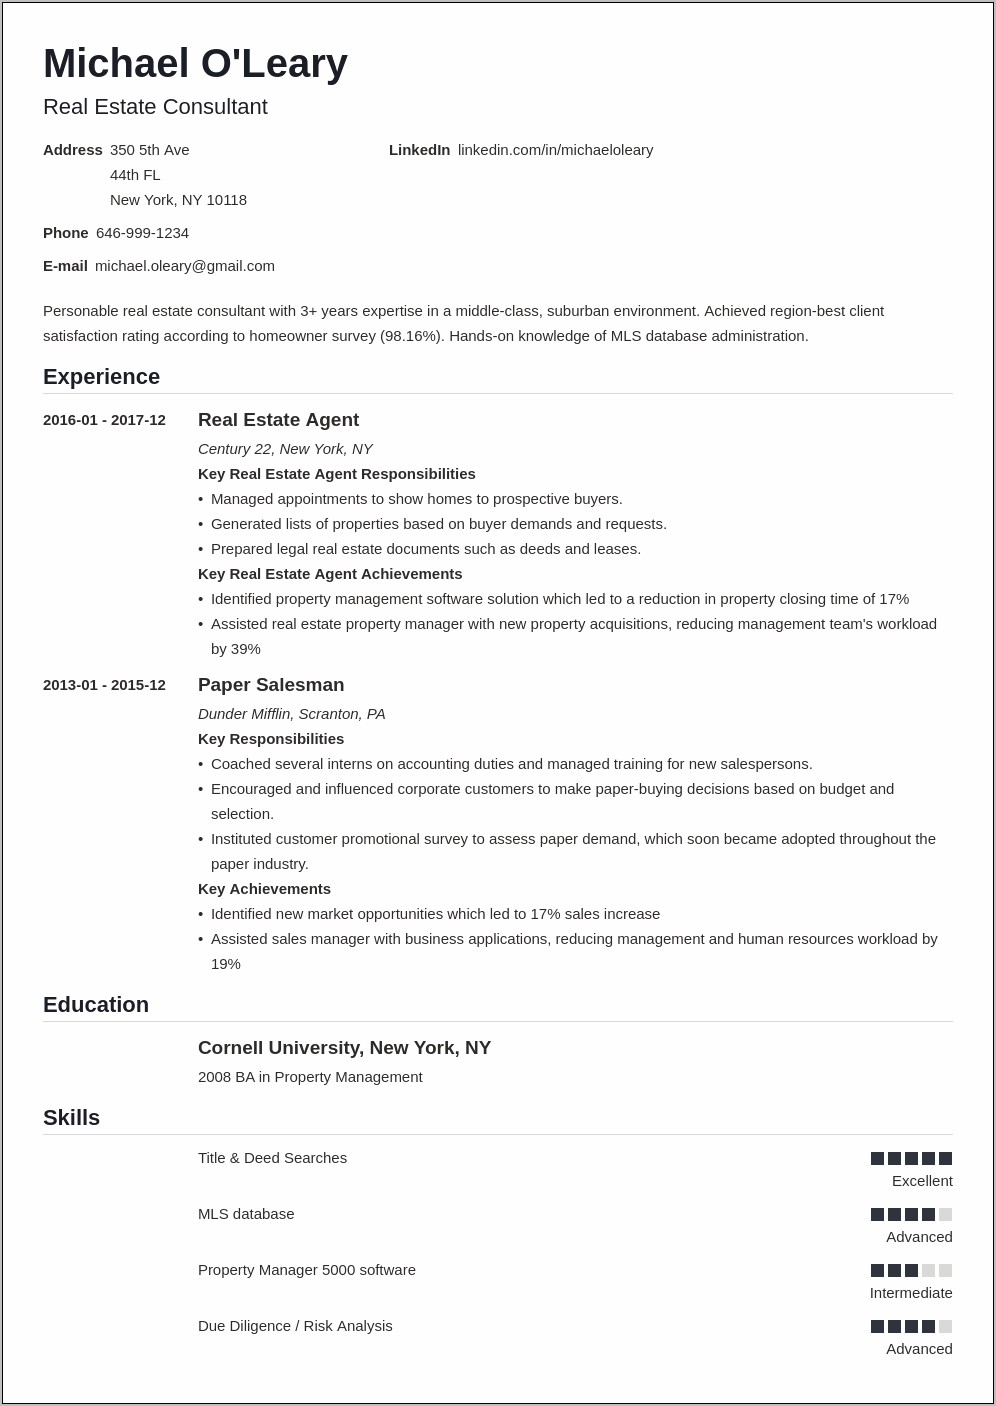 Resume To Get A Real Estate Job